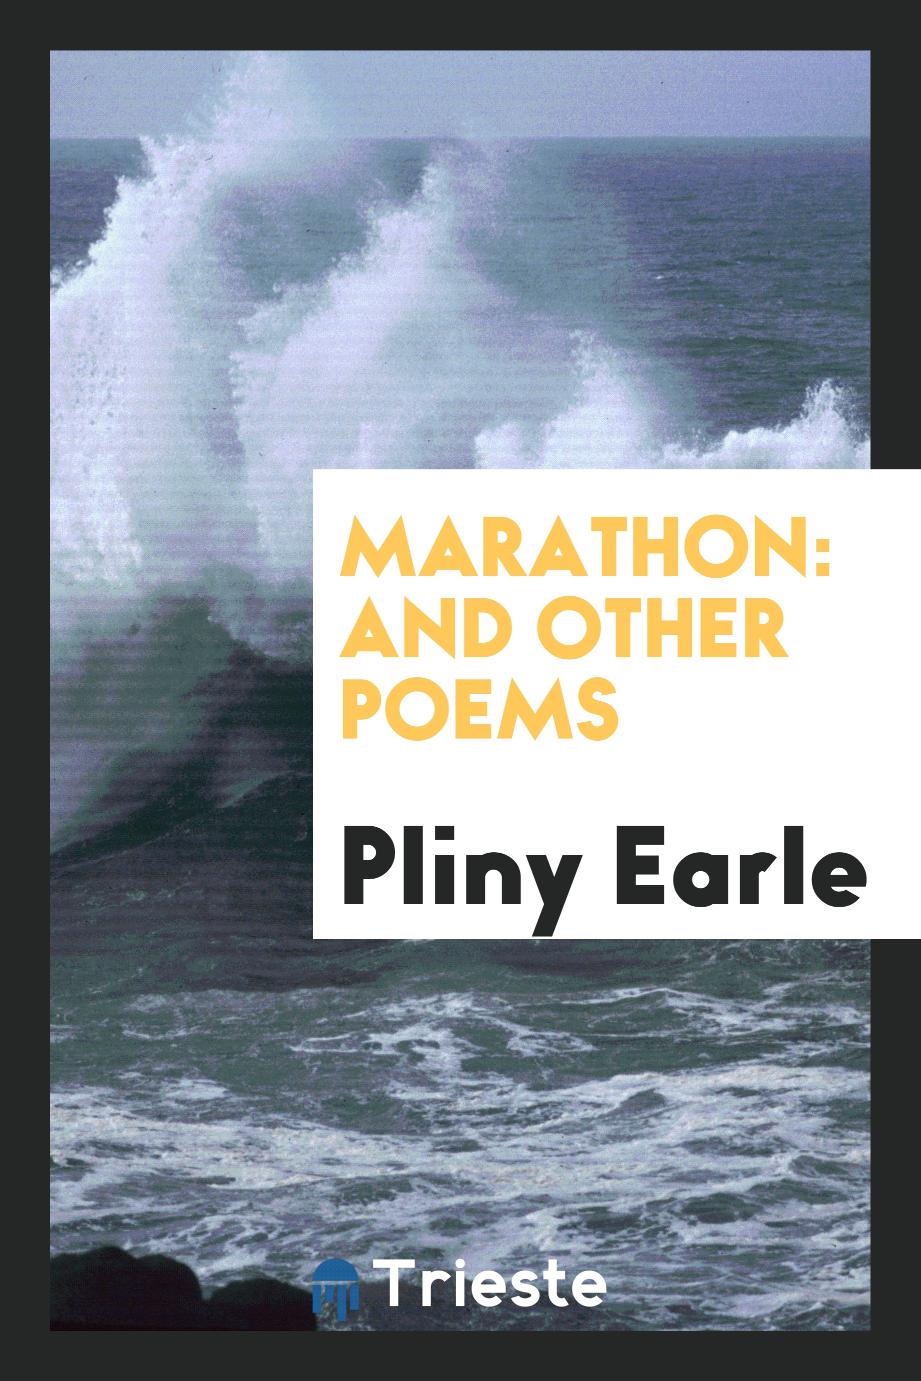 Marathon: and other poems